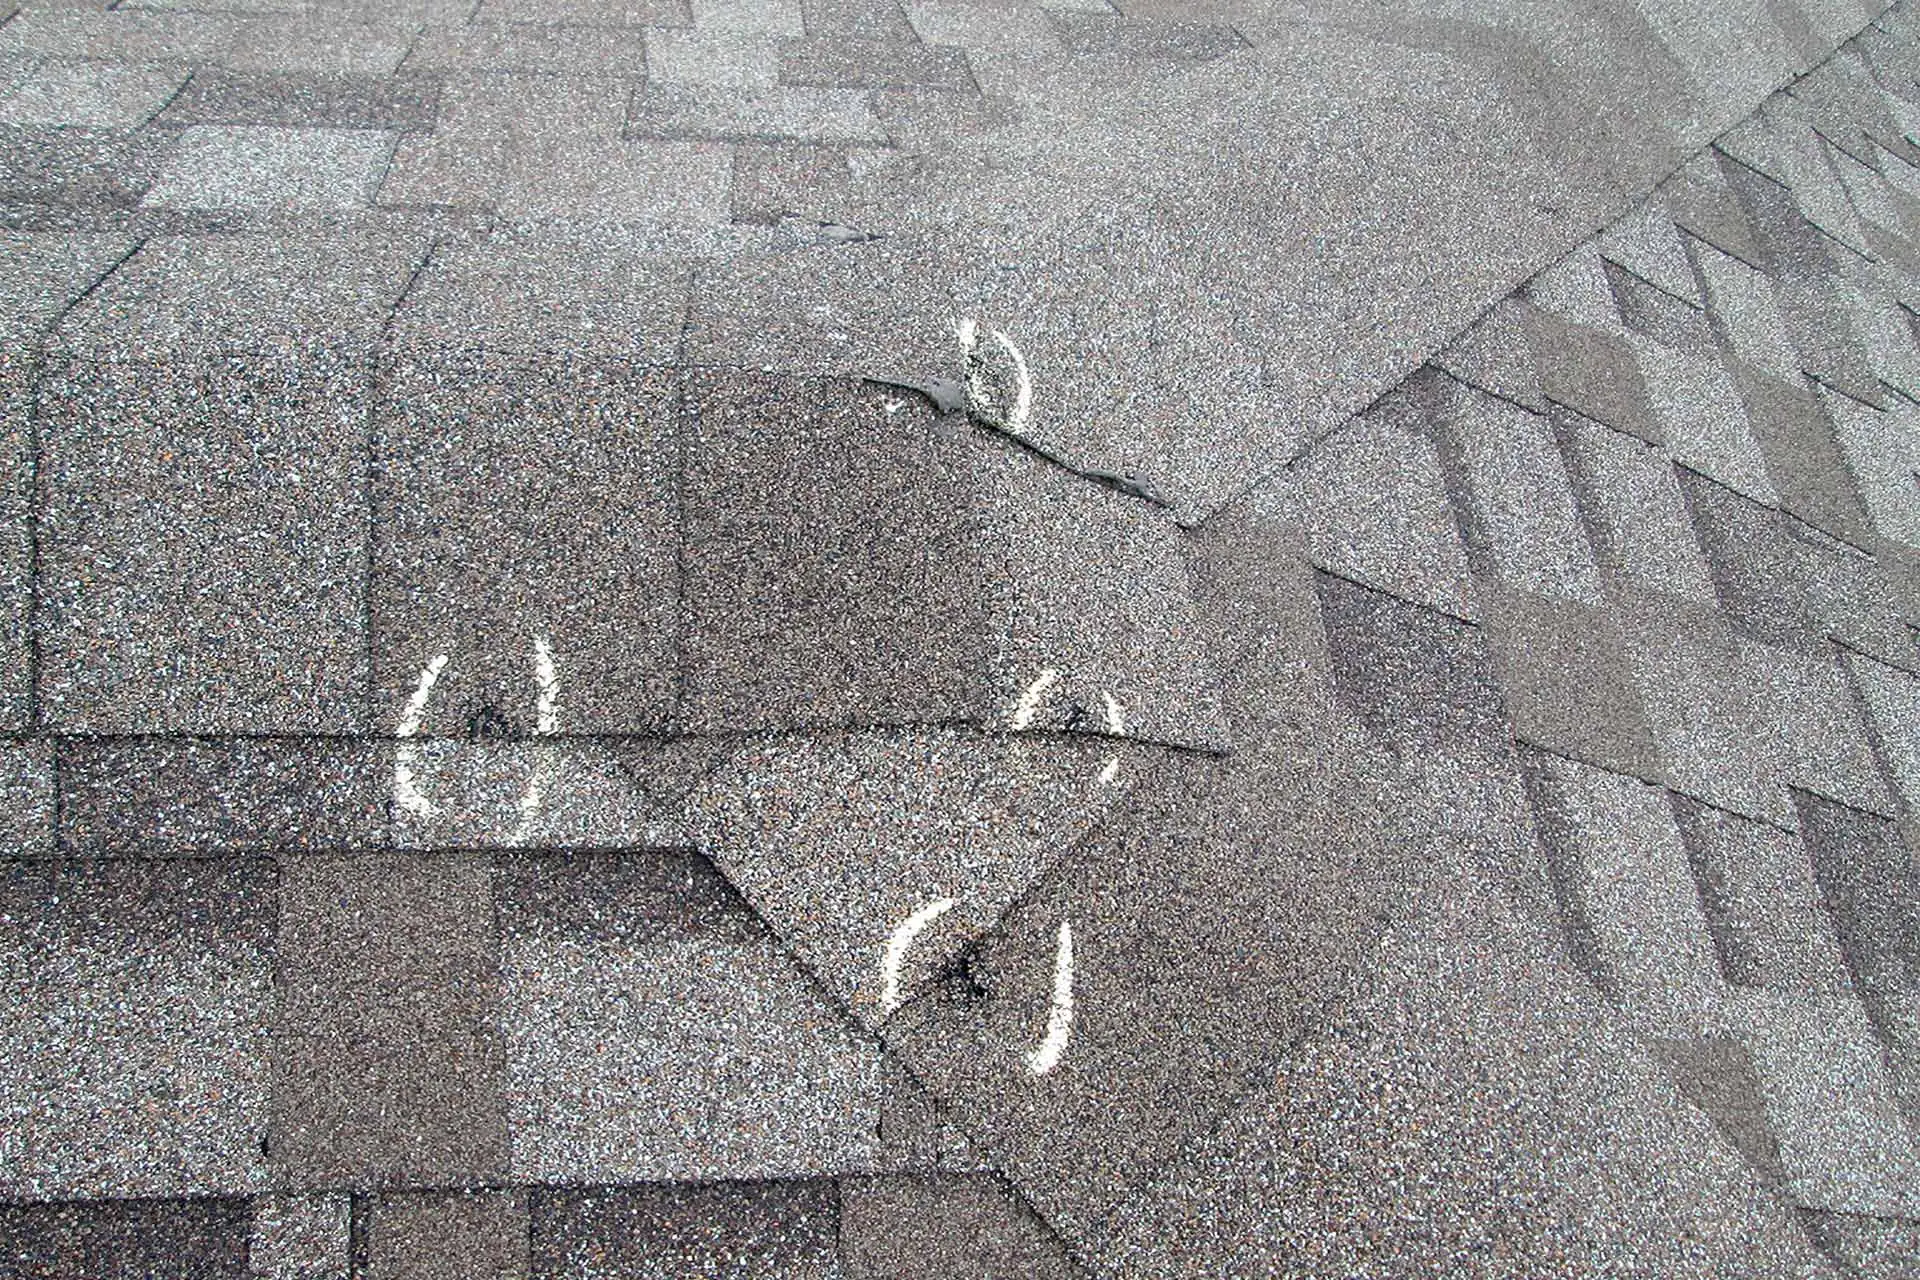 A home roof's shingles with hail damage near Lakeland, FL.